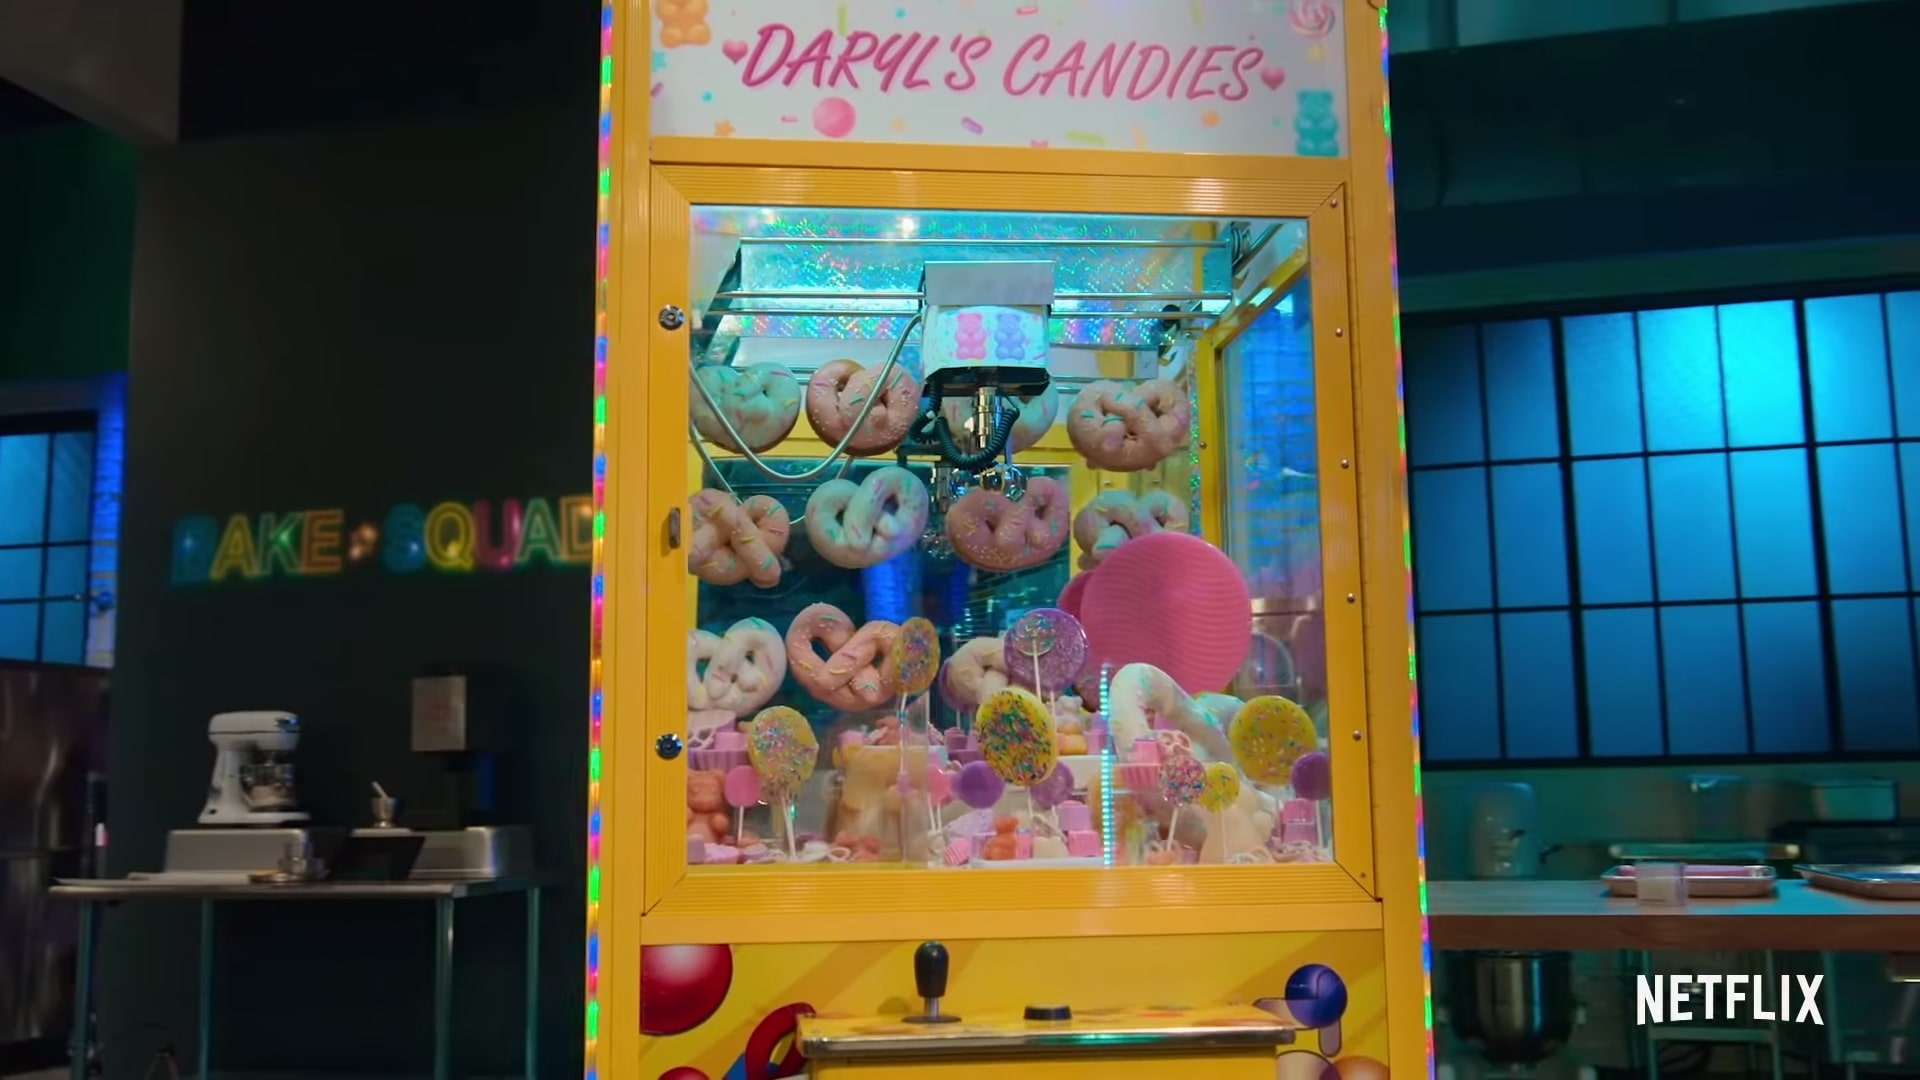 Netflix Bake Squad Season 1 Trailer, Coming to Netflix in August 2021